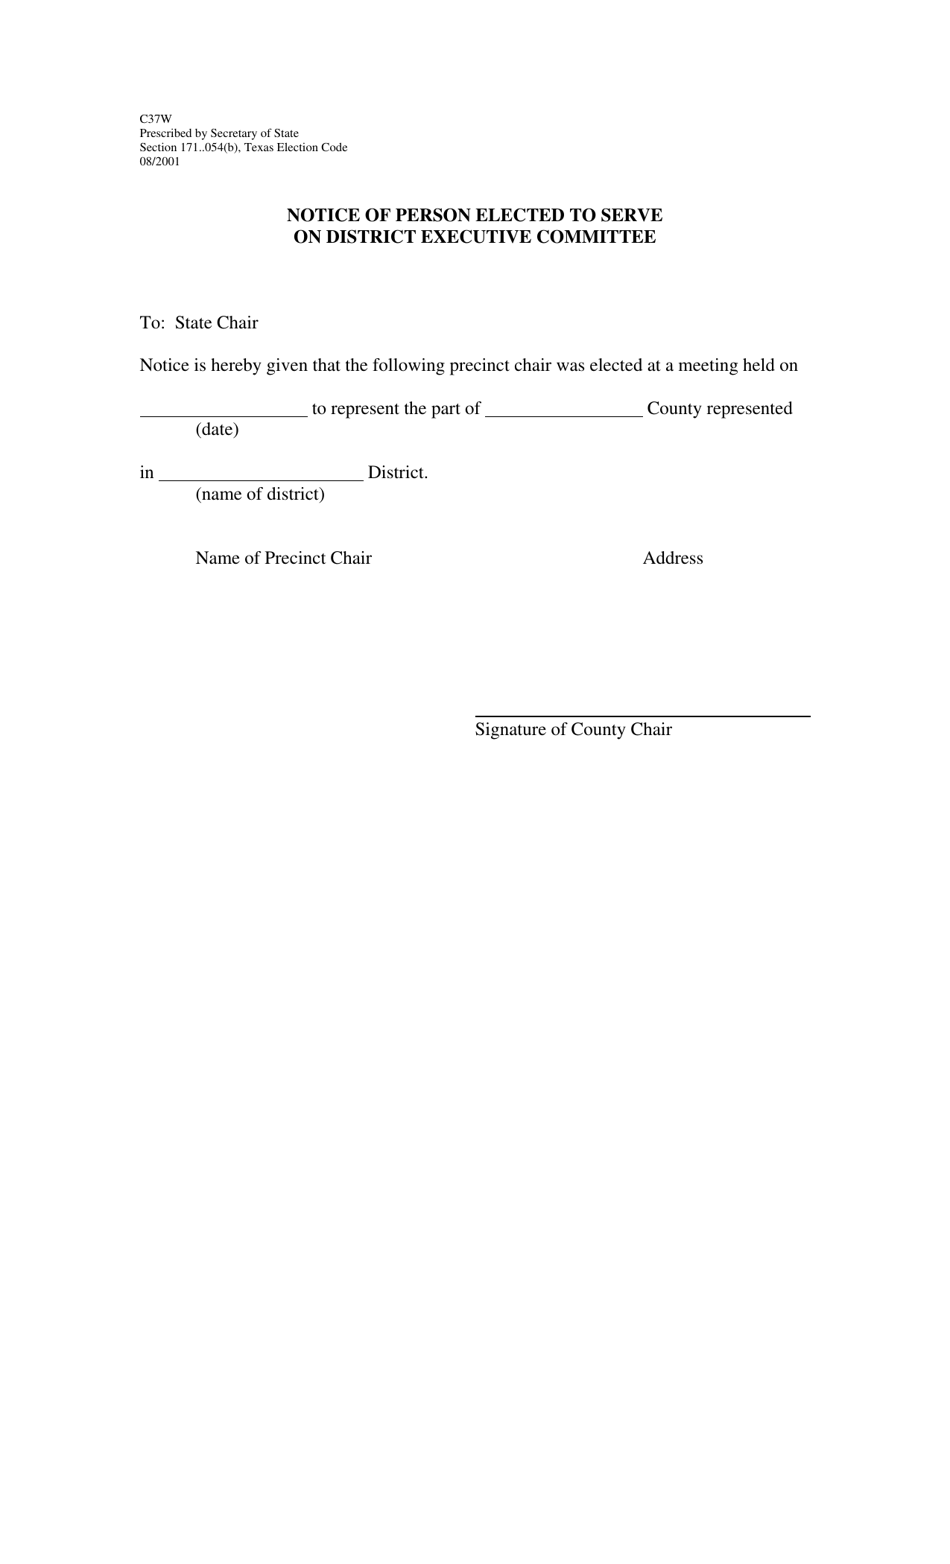 Form C37W Notice of Person Elected to Serve on District Executive Committee - Texas, Page 1